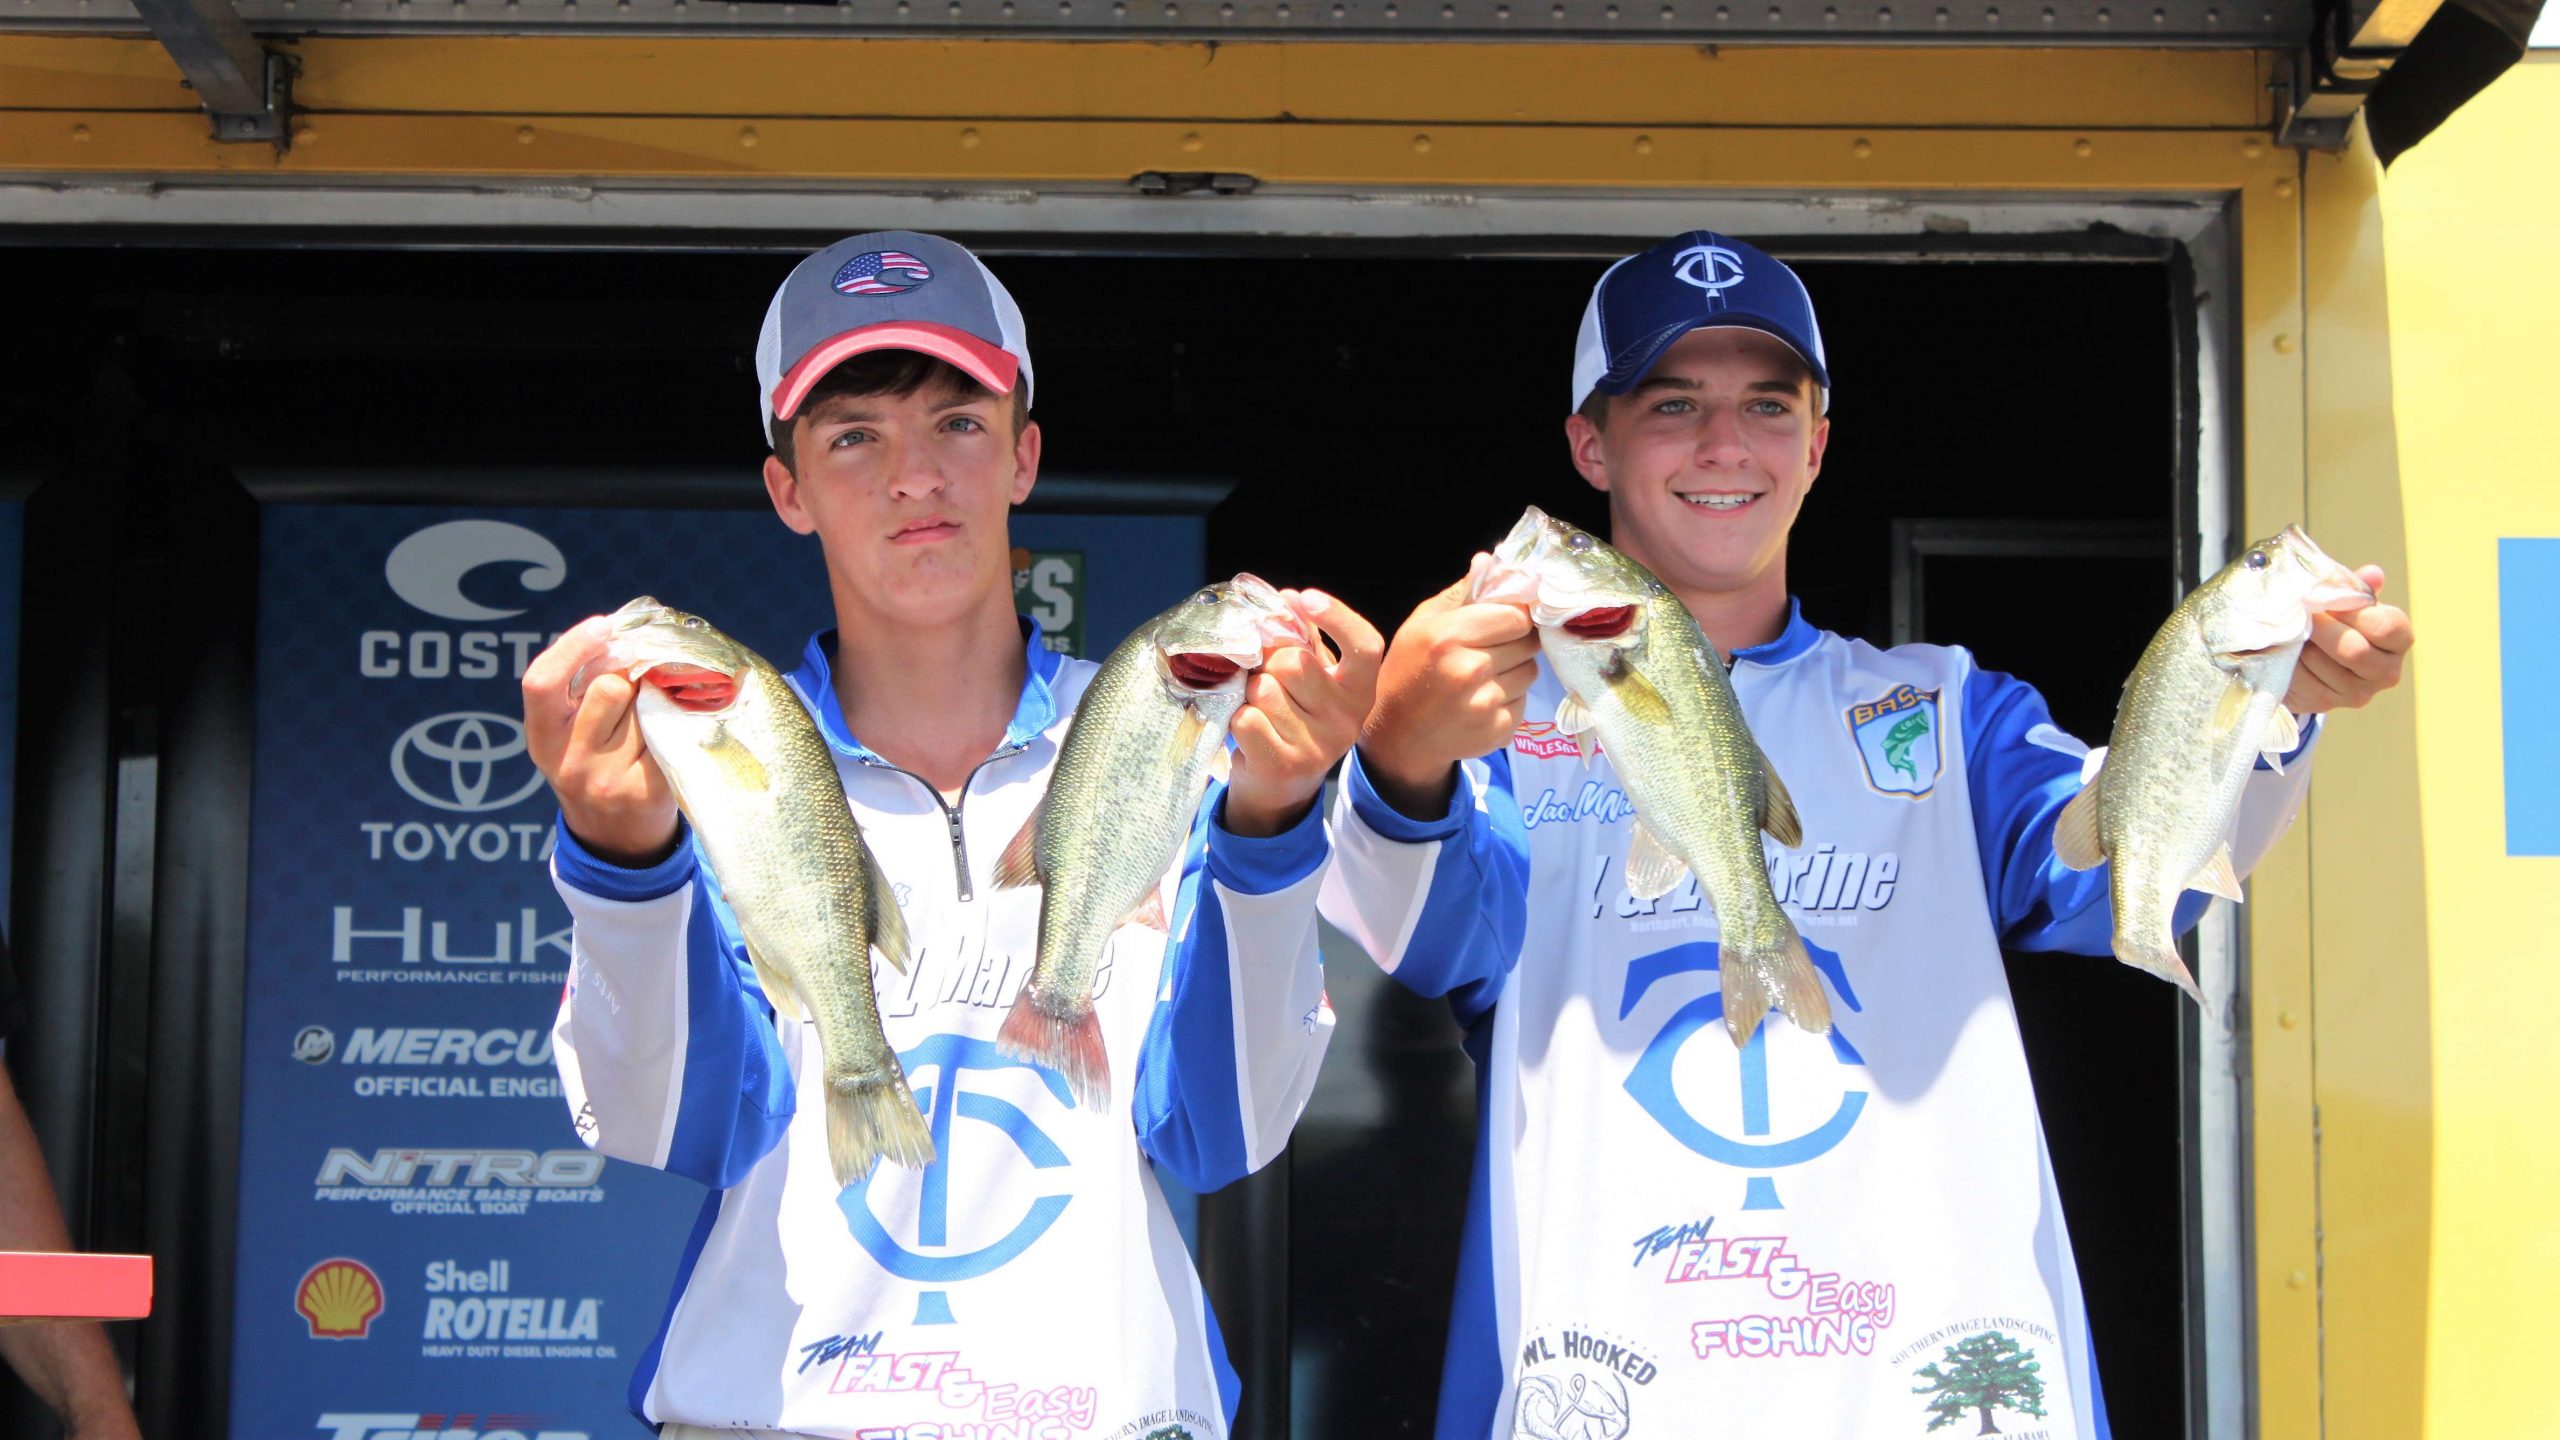 Jace McNutt and Nathan Harris of Alabama are in 21st place with 5-15.
